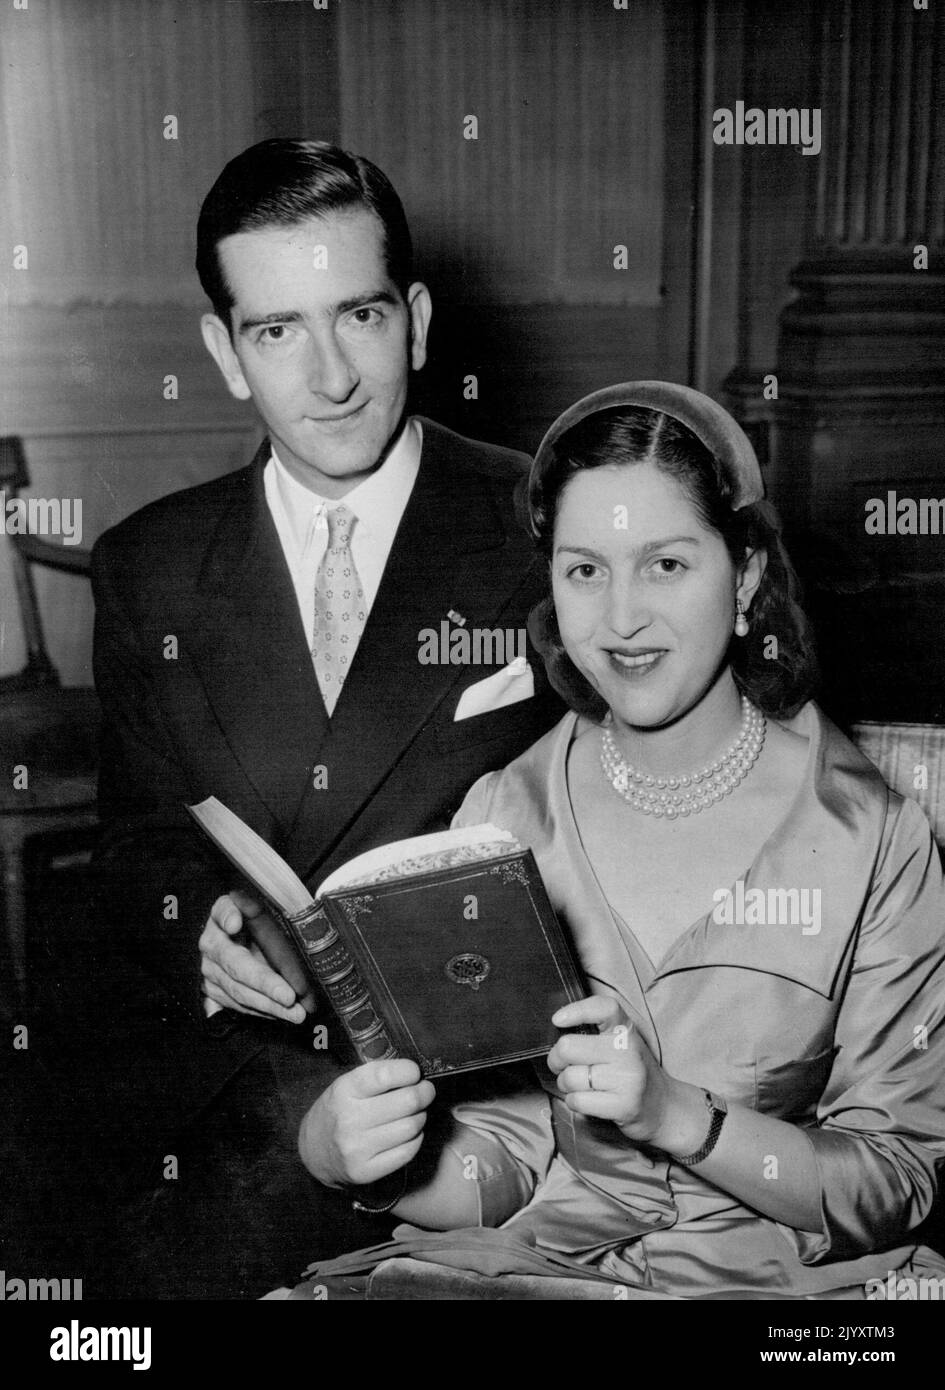 Ex-King Peter Publishers His Memories Holding a copy of his memoirs 'A King's Hertage' is ex-King Peter of Yugoslavia with his wife ex King Queen Alexandra at Claridges Hotel in London this afternoon (Wednesday). The book is to be published tomorrow and the former King and Queen, who were recently reconciled flew into London yesterday in connection with the Publication. March 23, 1955. (Photo by Reuterphoto) Stock Photo